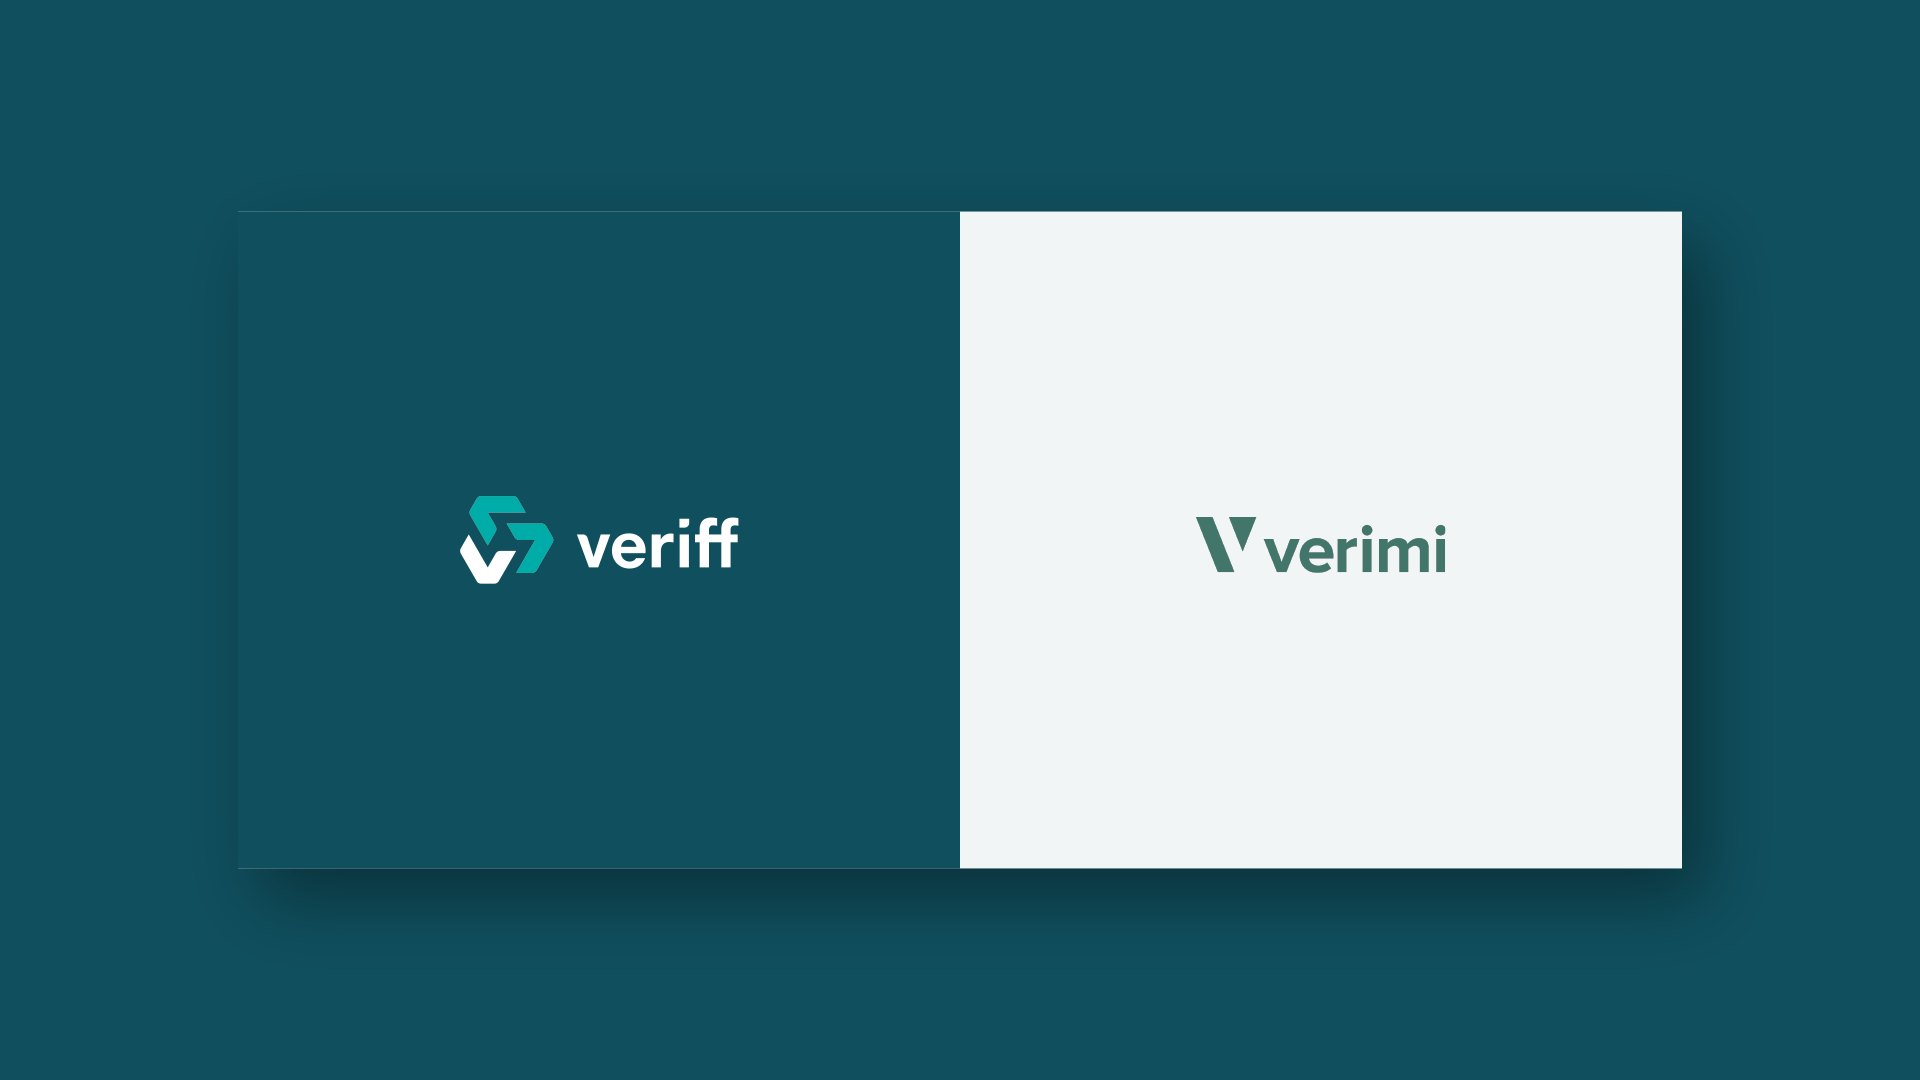 Veriff partners with the German digital identity management company Verimi